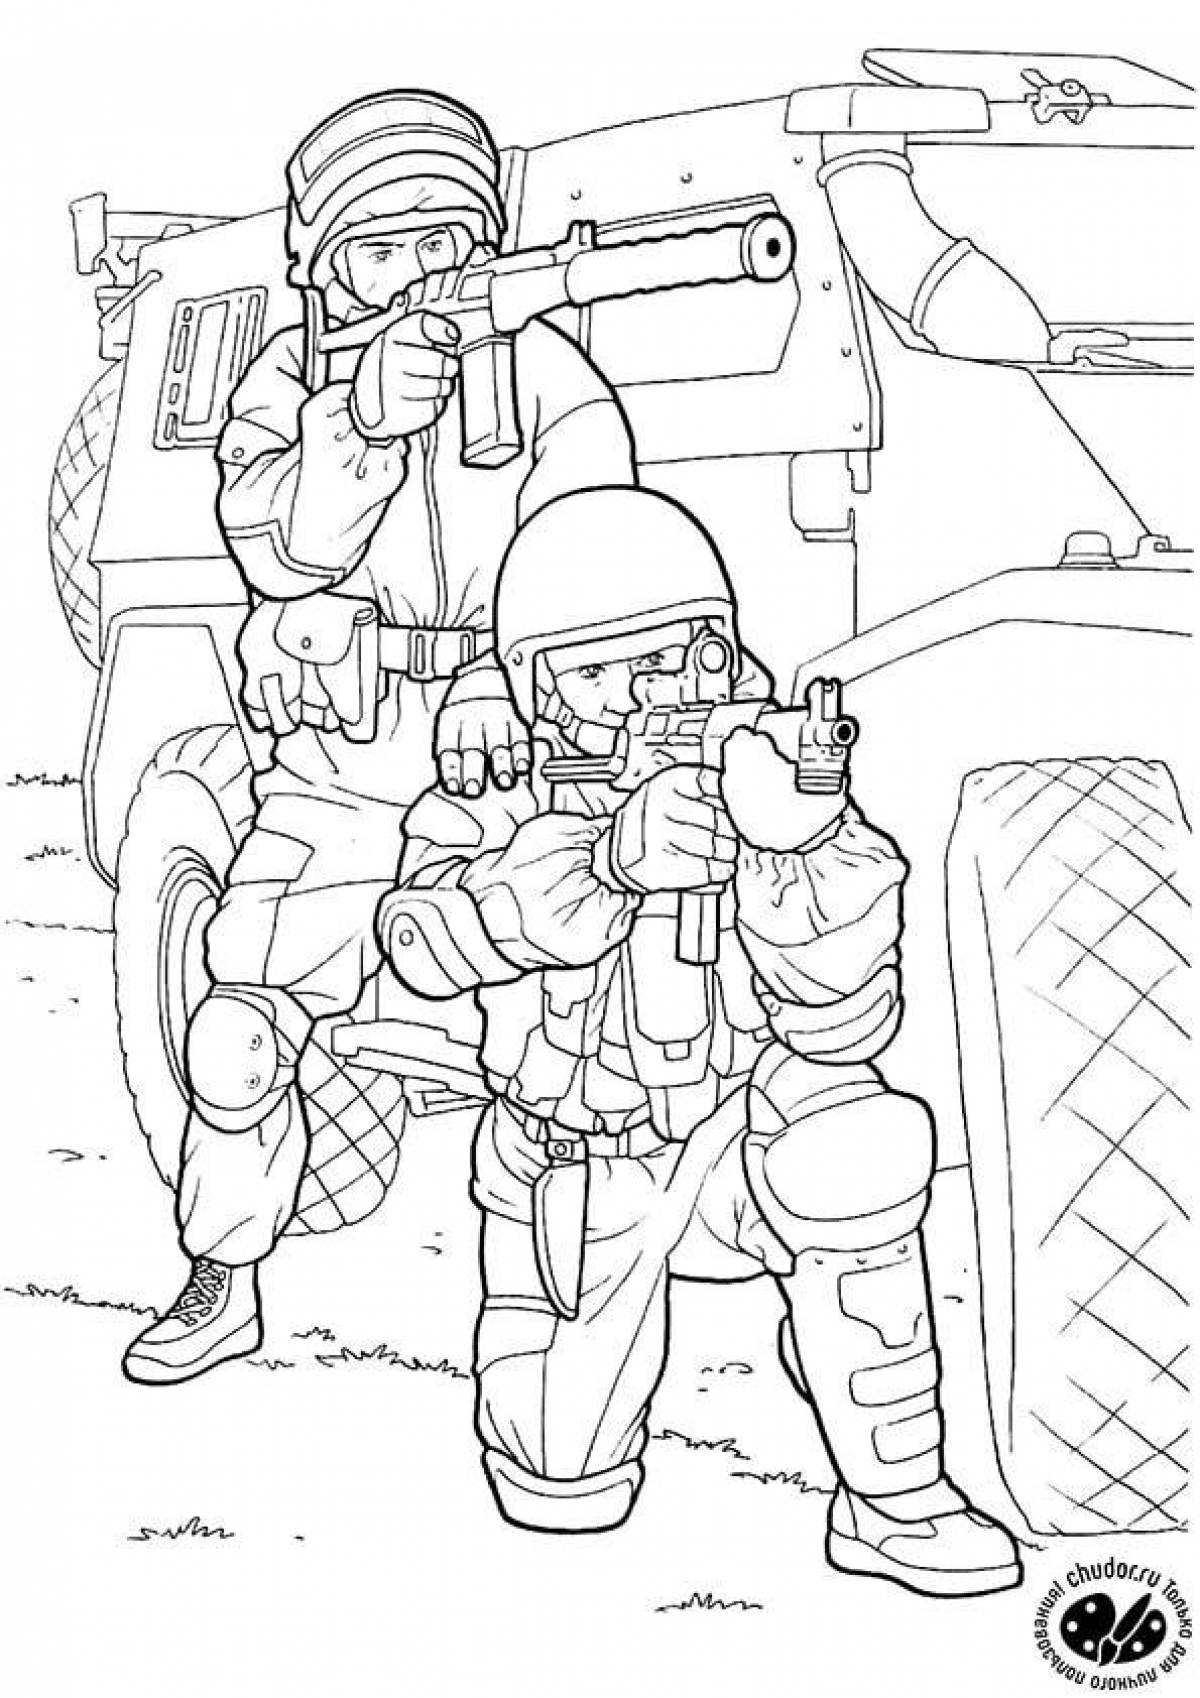 Wonderful soldier coloring book for kids